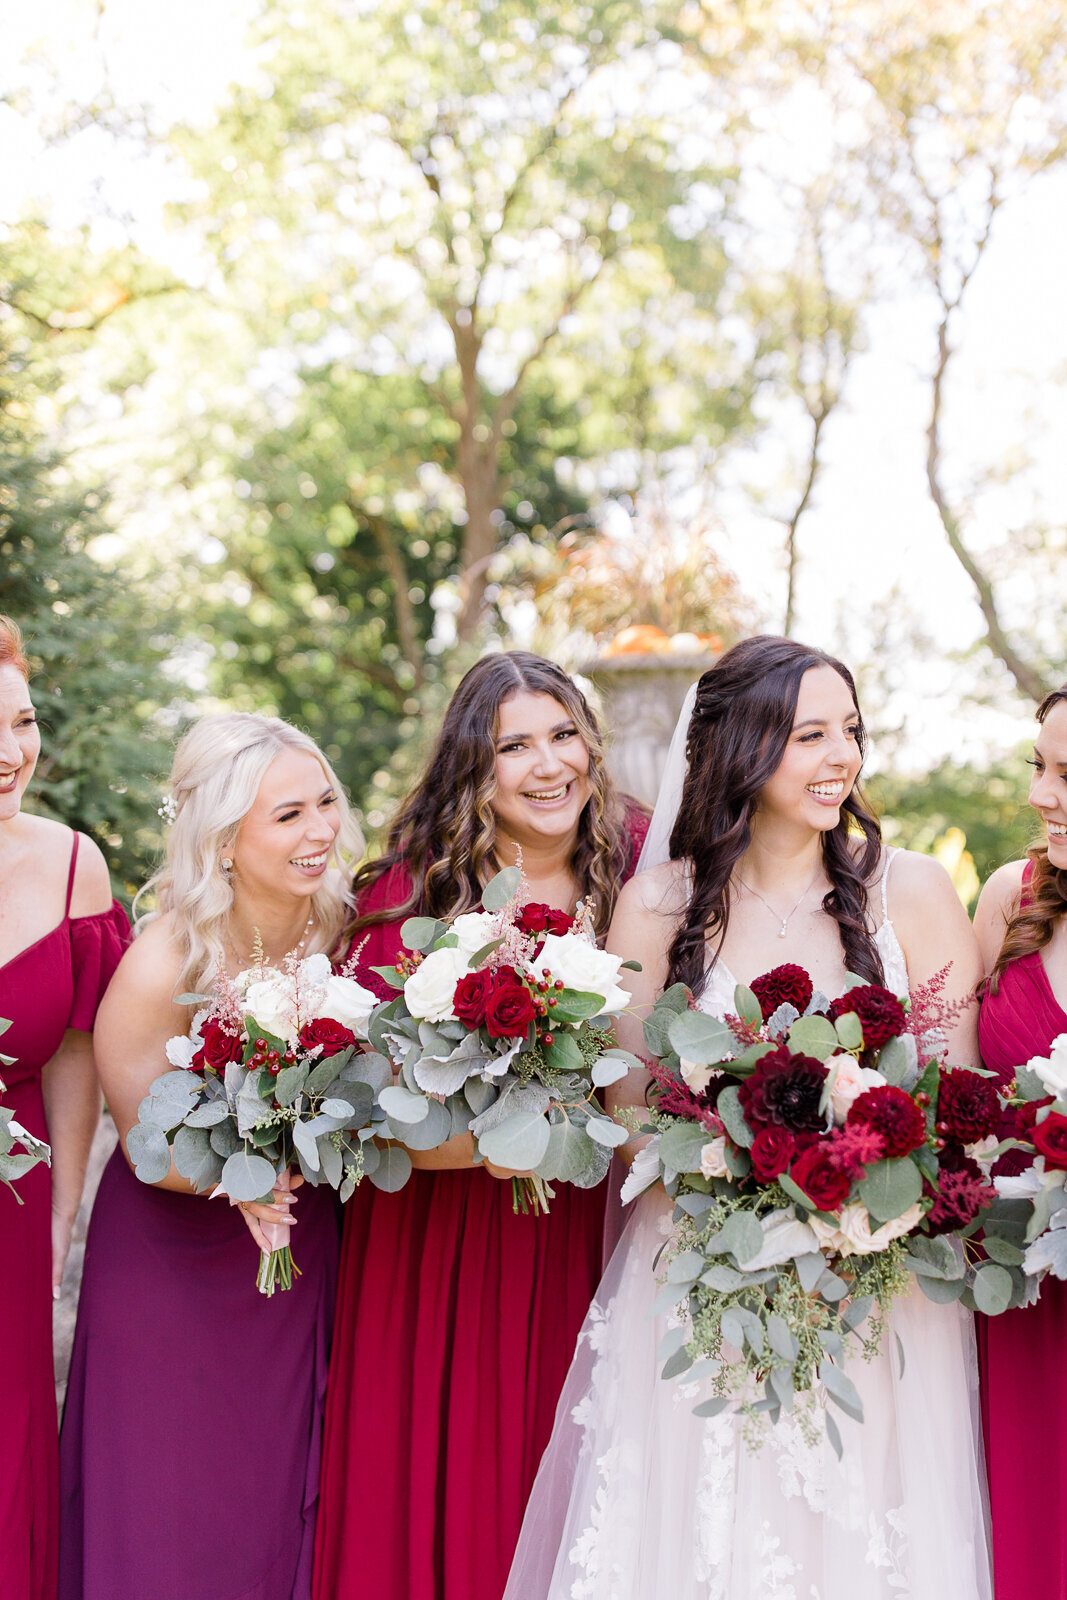 bride and bridesmaids portraits captured by Ana Maria Photography at wedding venue Stan Hywett Hall and Gardens